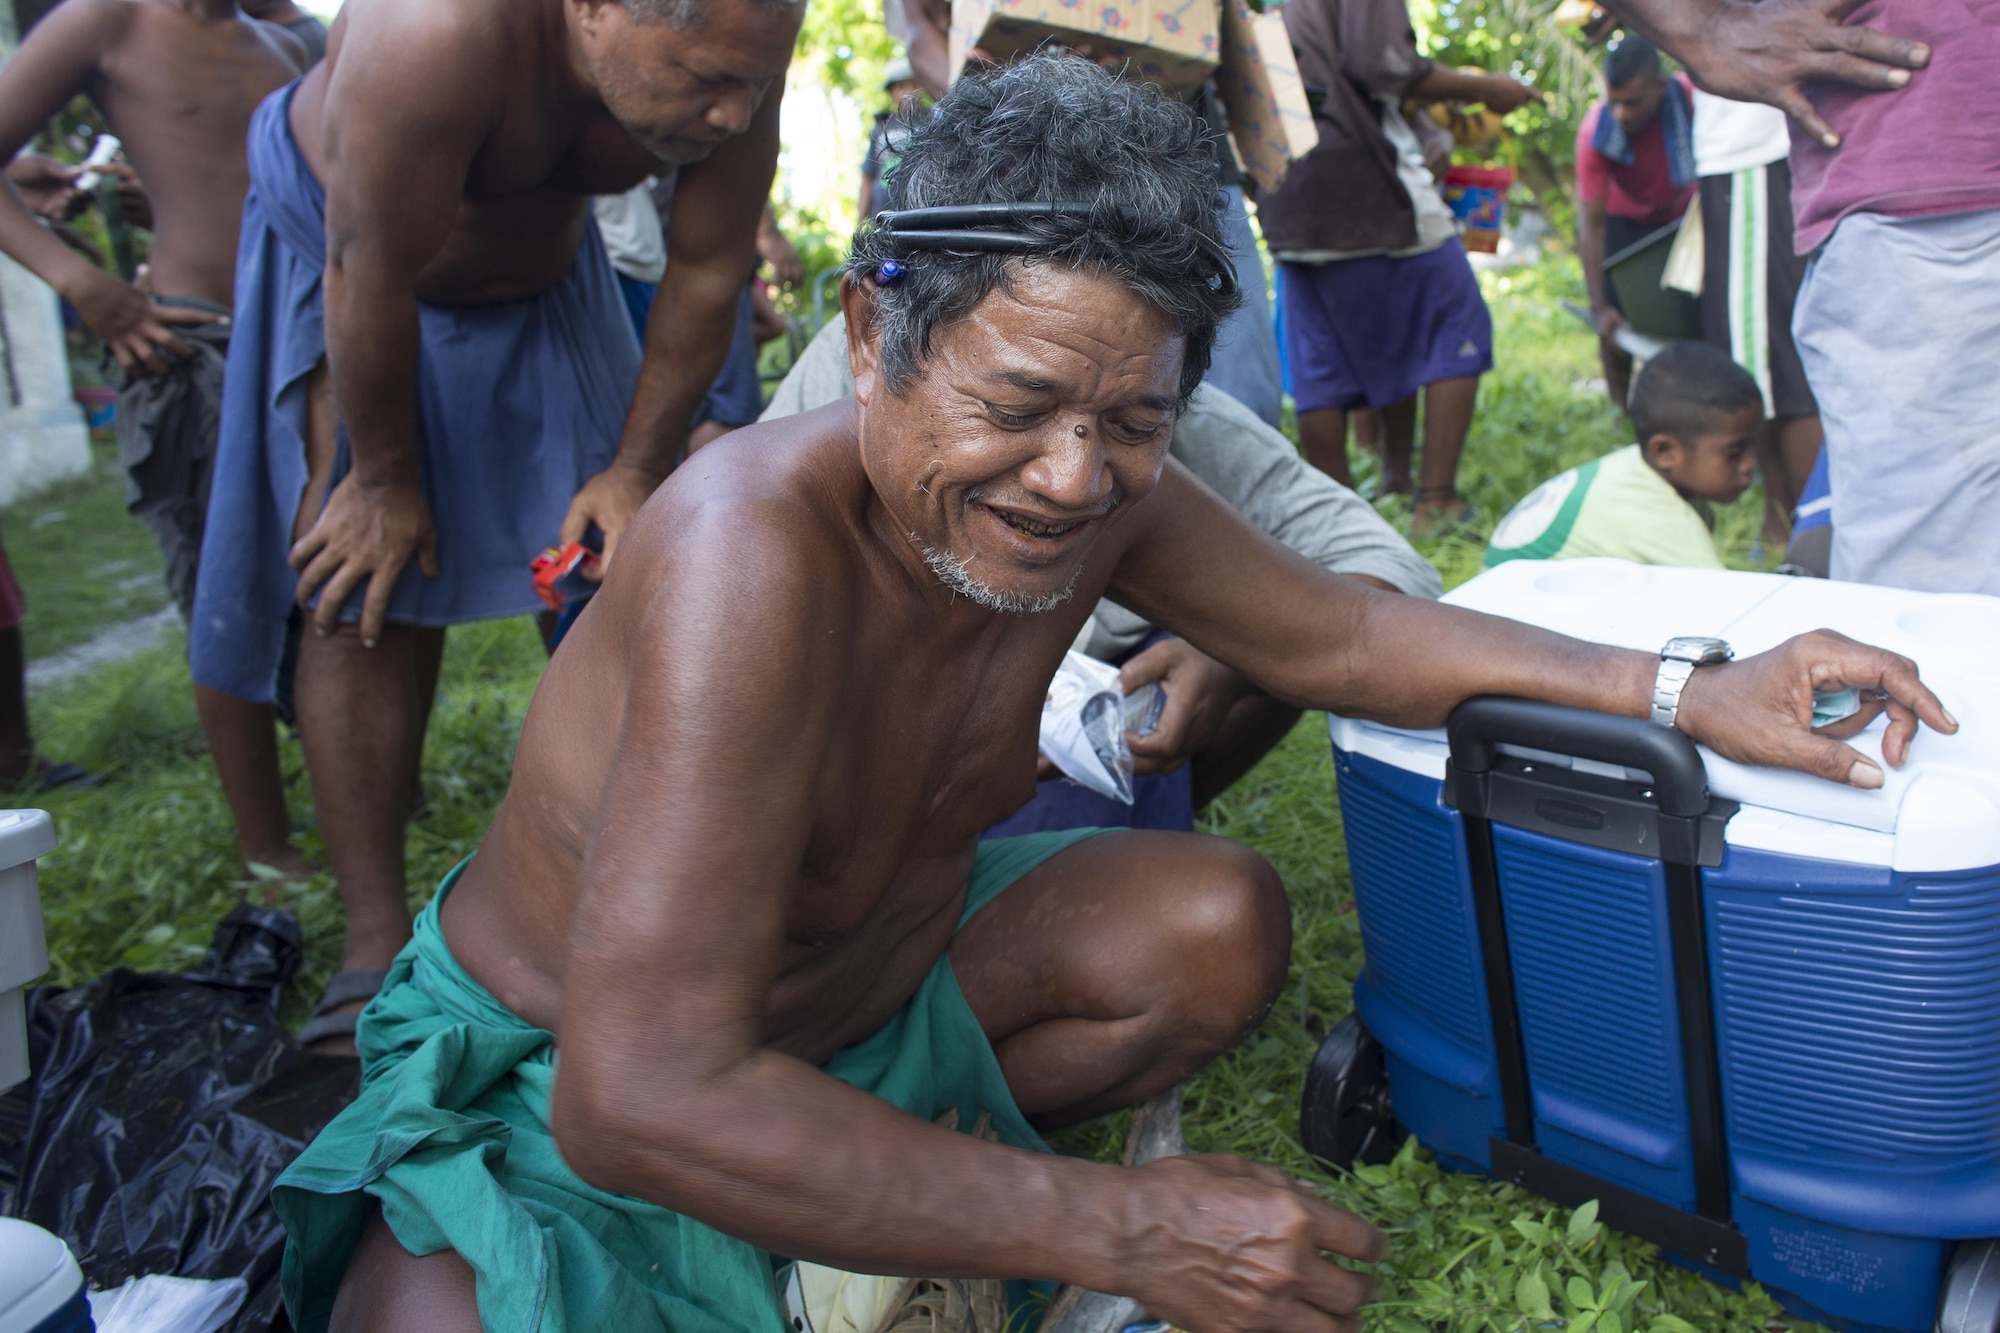 Louis Mangtau, chief of Fais Island, smiles as he sorts through supplies that were dropped during Operation Christmas Drop 2015, Dec. 8, 2015, at Fais Island, Federated States of Micronesia. Operation Christmas Drop is a humanitarian/disaster relief training event where C-130 crews provide critical supplies to 56 islands throughout the Commonwealth of the Northern Marianas, Federated States of Micronesia and Republic of Palau. This year marks the first ever trilateral execution that includes air support from the U.S. Air Force, Japan Air Self-Defense Force and the Royal Australian Air Force. (U.S. Air Force photo by Osakabe Yasuo/Released)